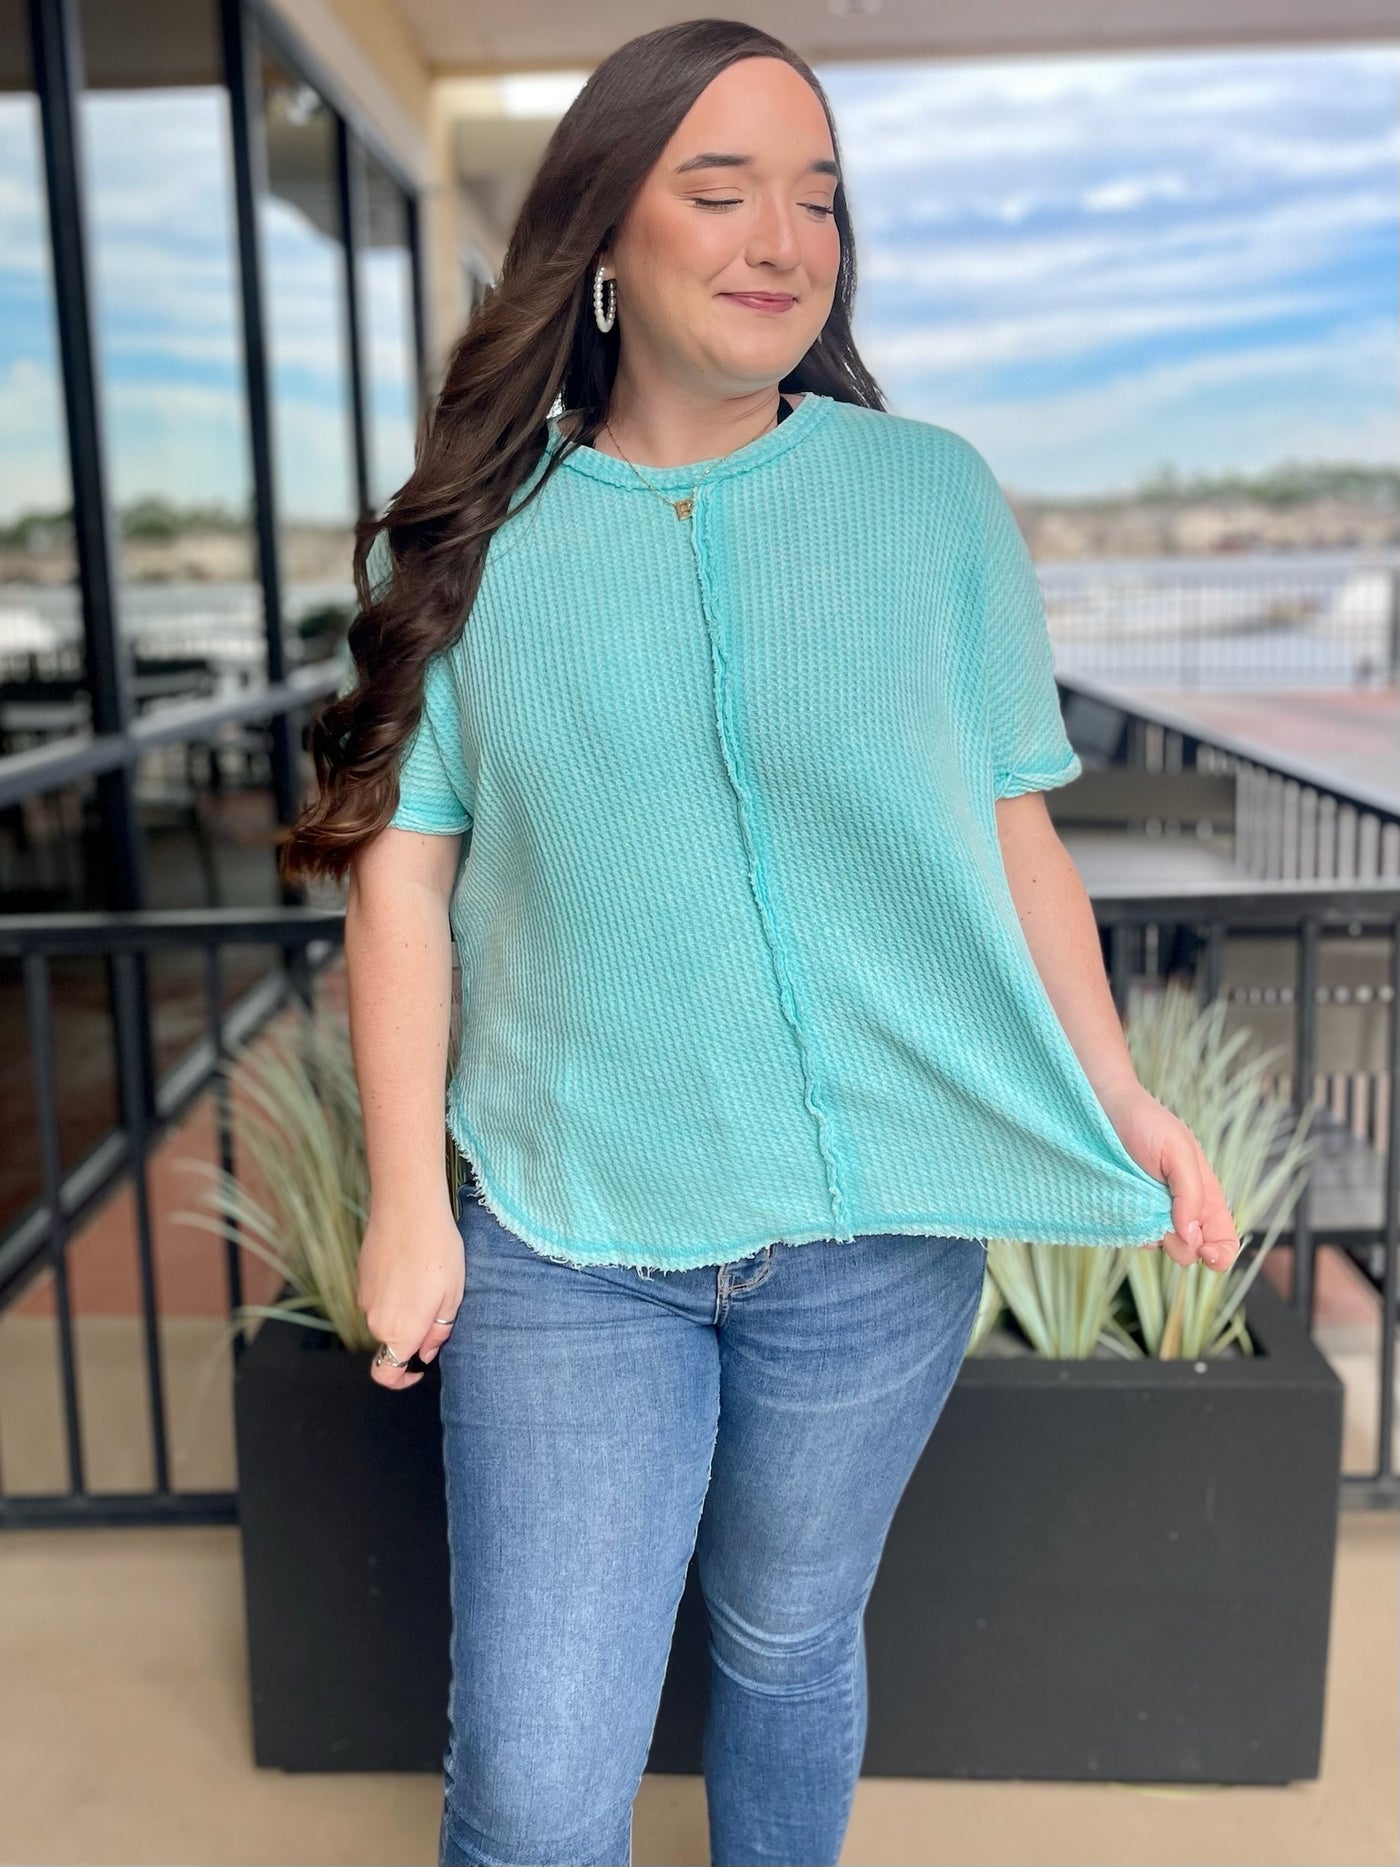 KORT IN MINT SKY WAFFLE SHORT SLEEVE TOP FRONT VIEW LOOKING TO THE SIDE